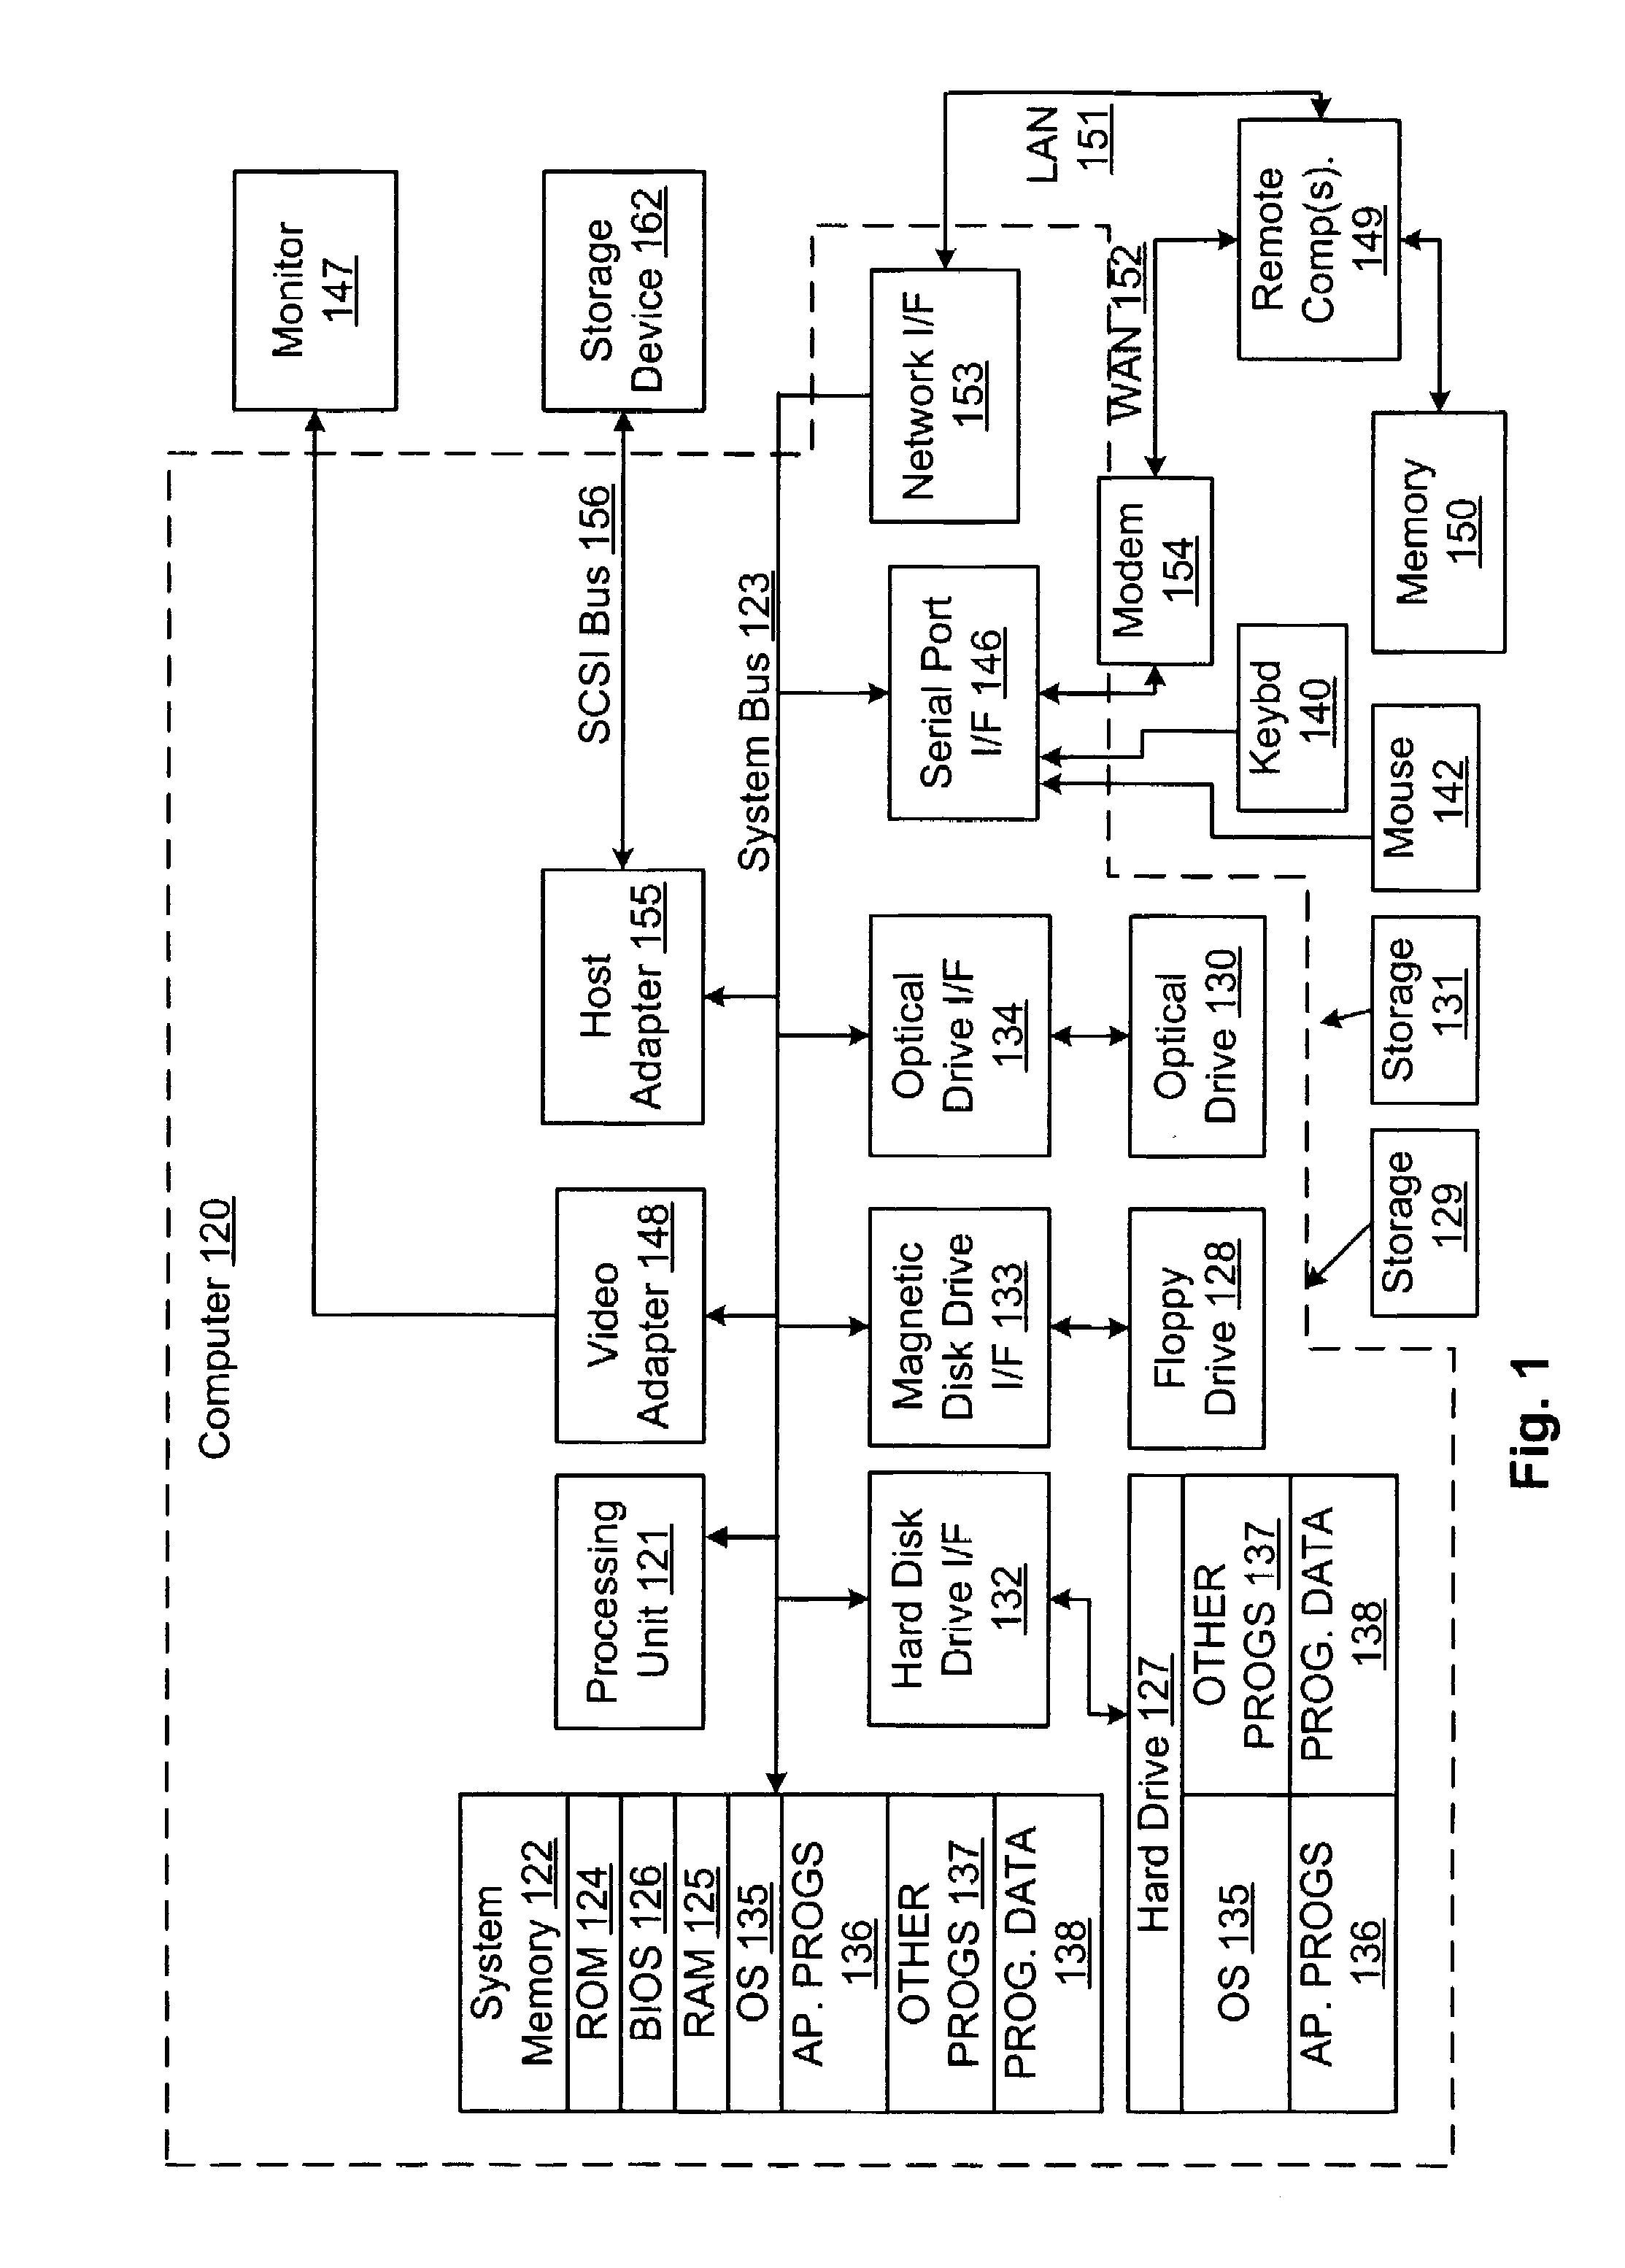 Managing a distributed computing system